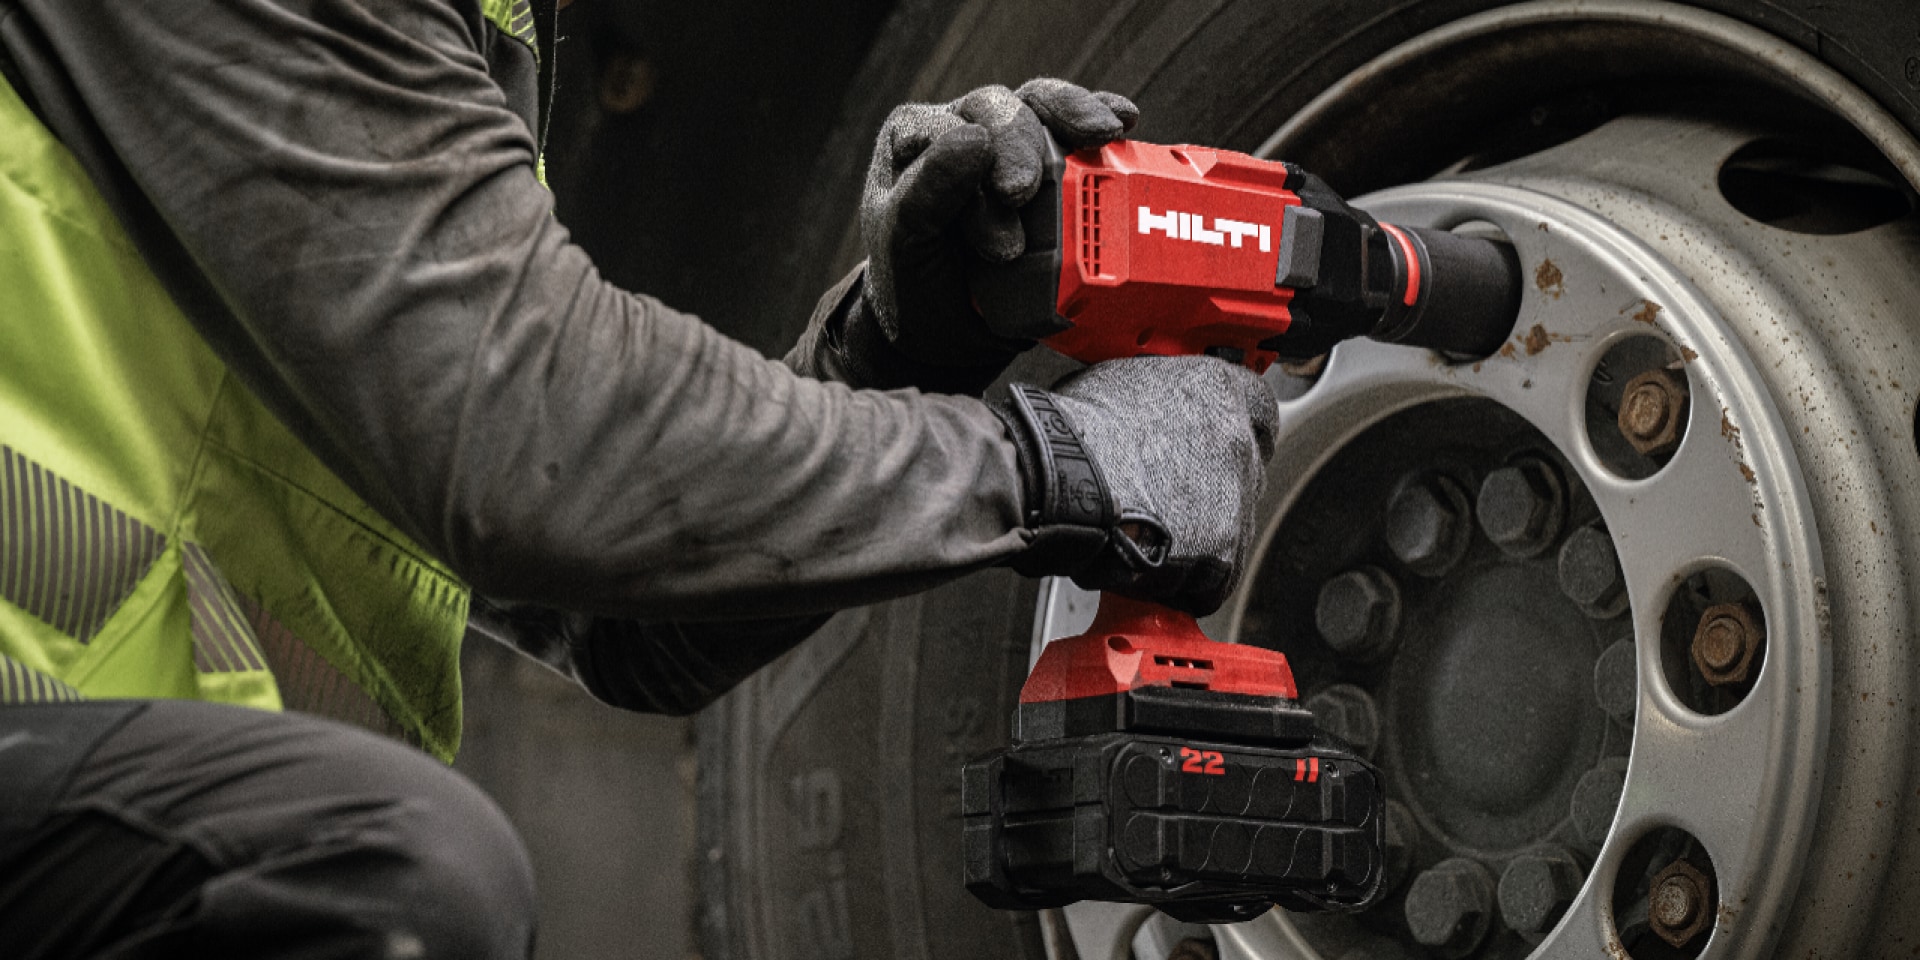 SIW 10-22 ¾” HIGH-TORQUE CORDLESS IMPACT WRENCH